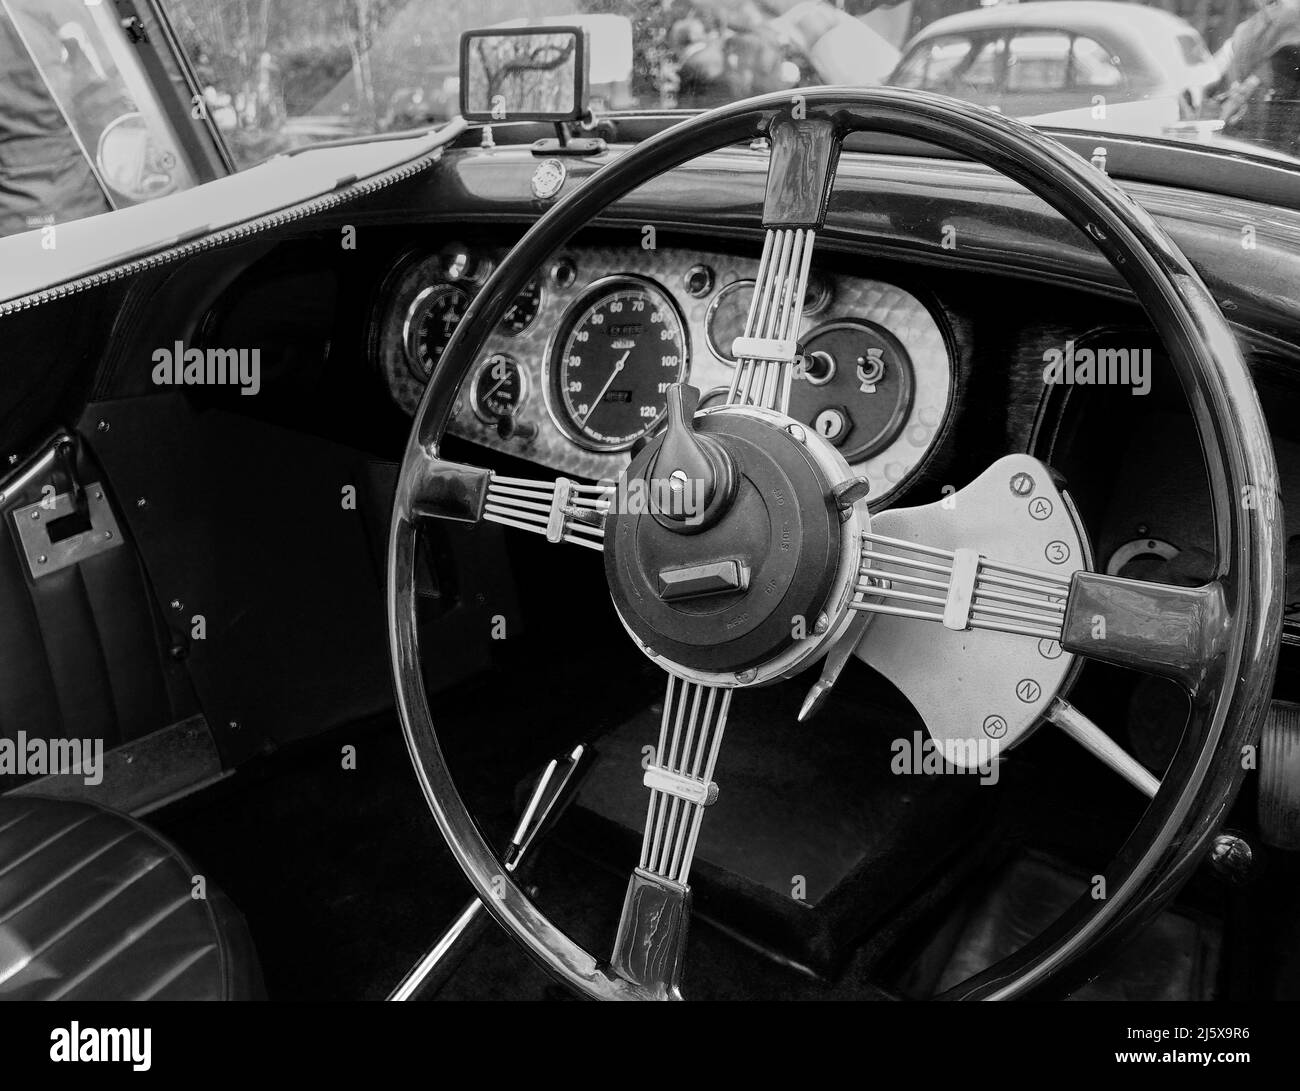 Black and white mage showing the very large steering wheel and dashboard of a pre war car Stock Photo